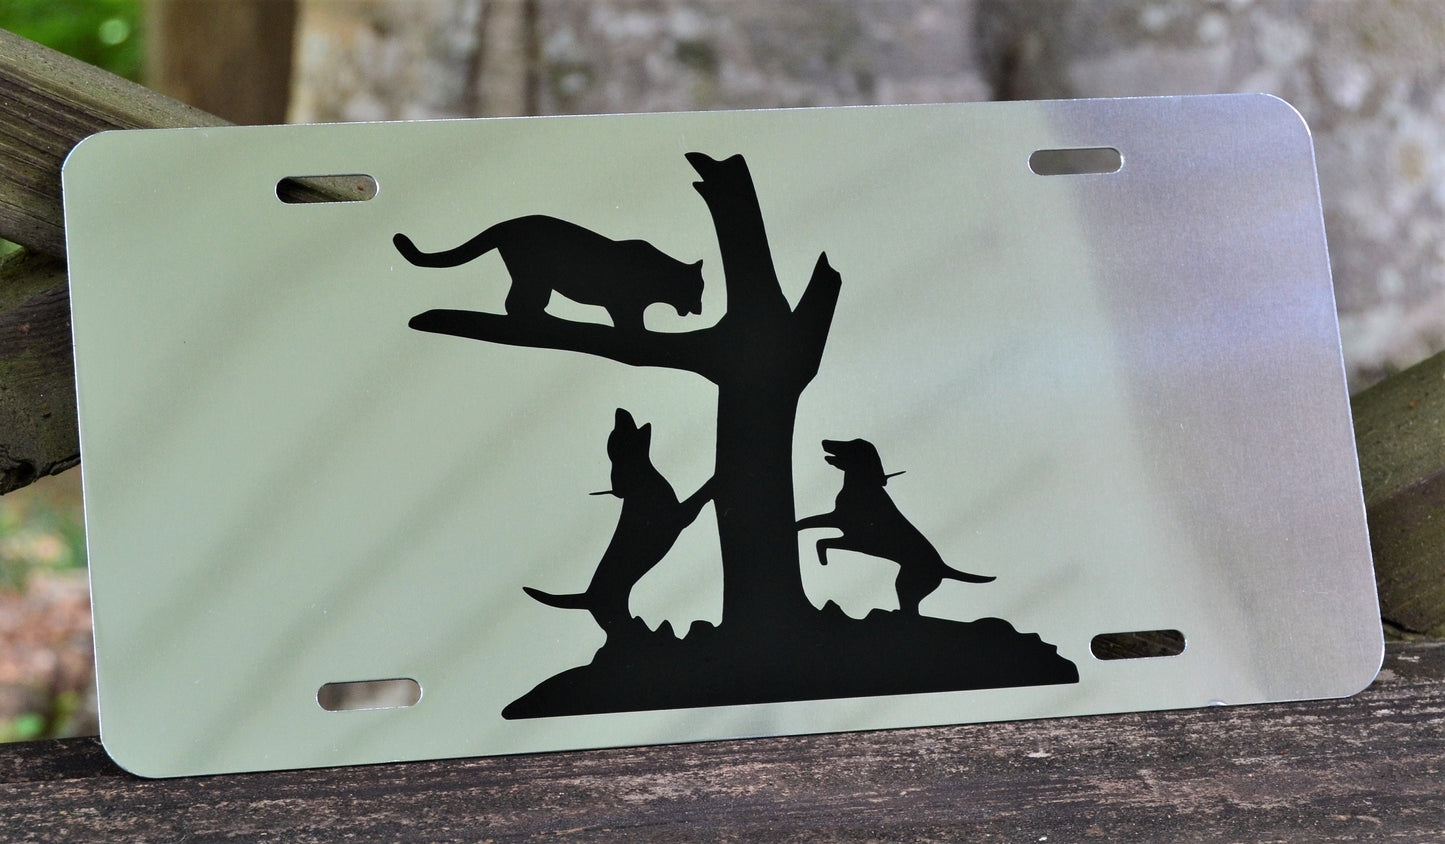 Mountain Lion Treed Hounds Hunting Mirrored  License Plate